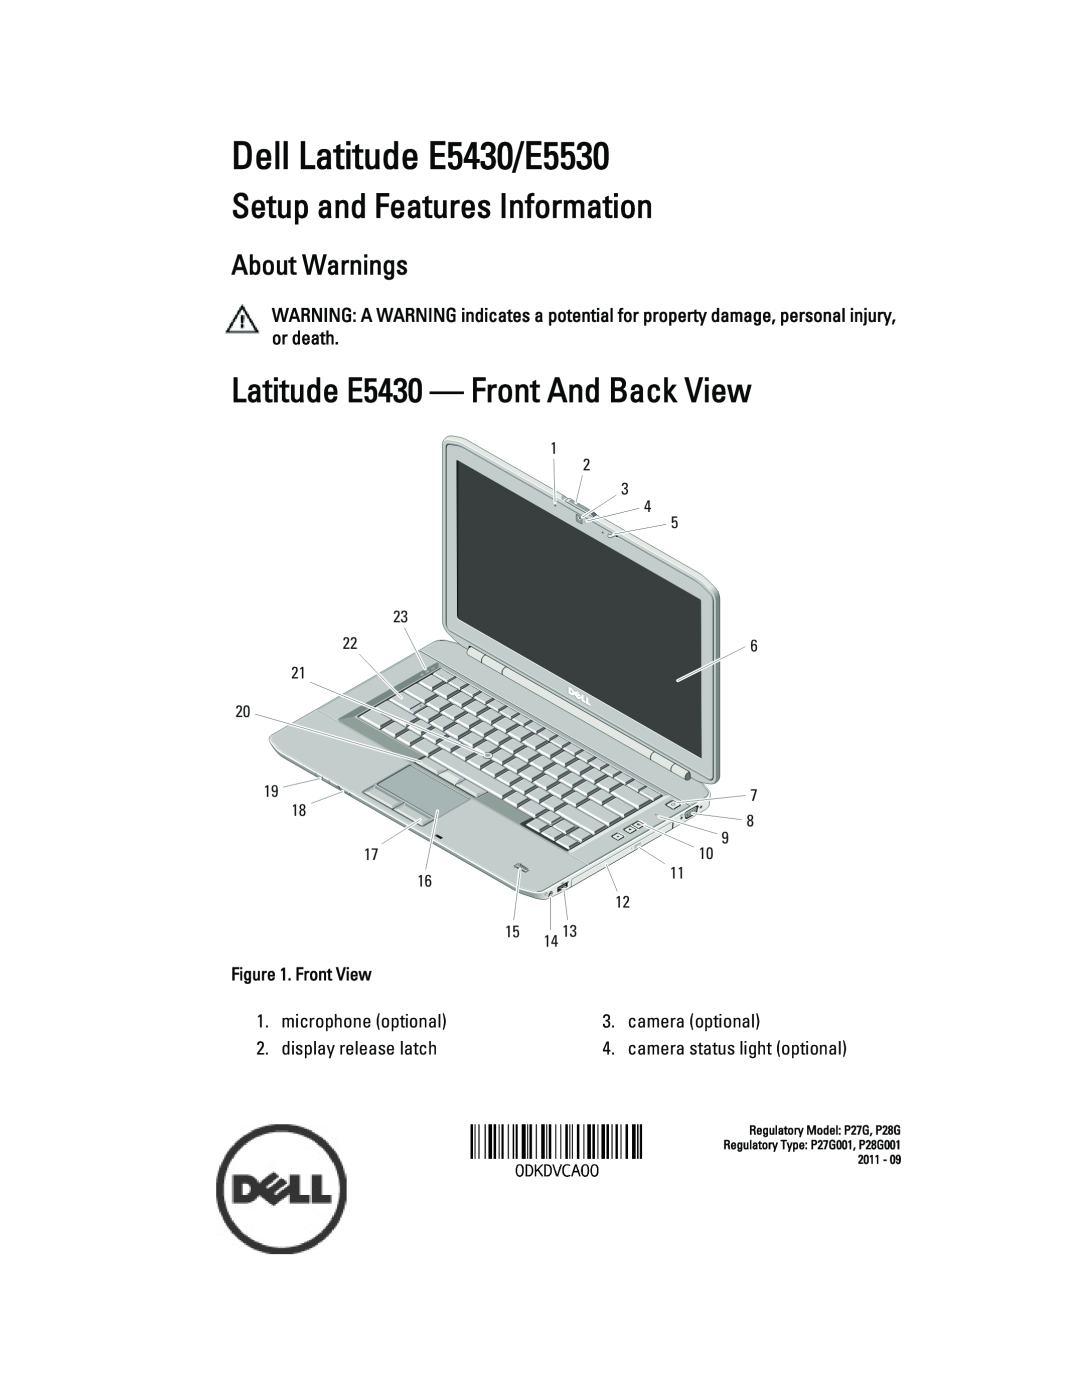 Dell manual Setup and Features Information, Latitude E5430 - Front And Back View, Dell Latitude E5430/E5530 